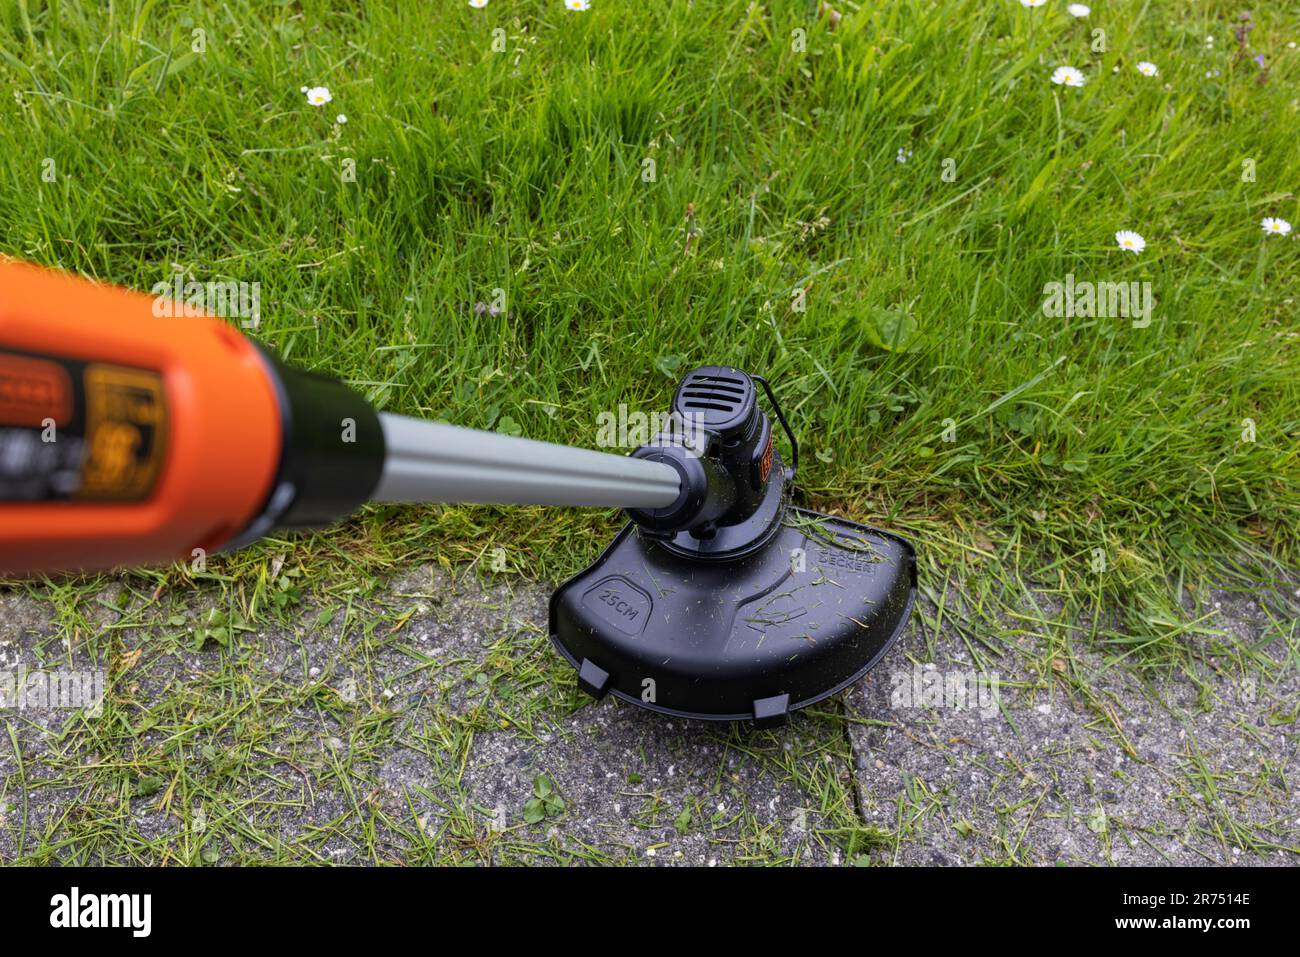 Cutting lawn edges with Black & Decker cordless lawn trimmer, lawn care, garden, Stock Photo